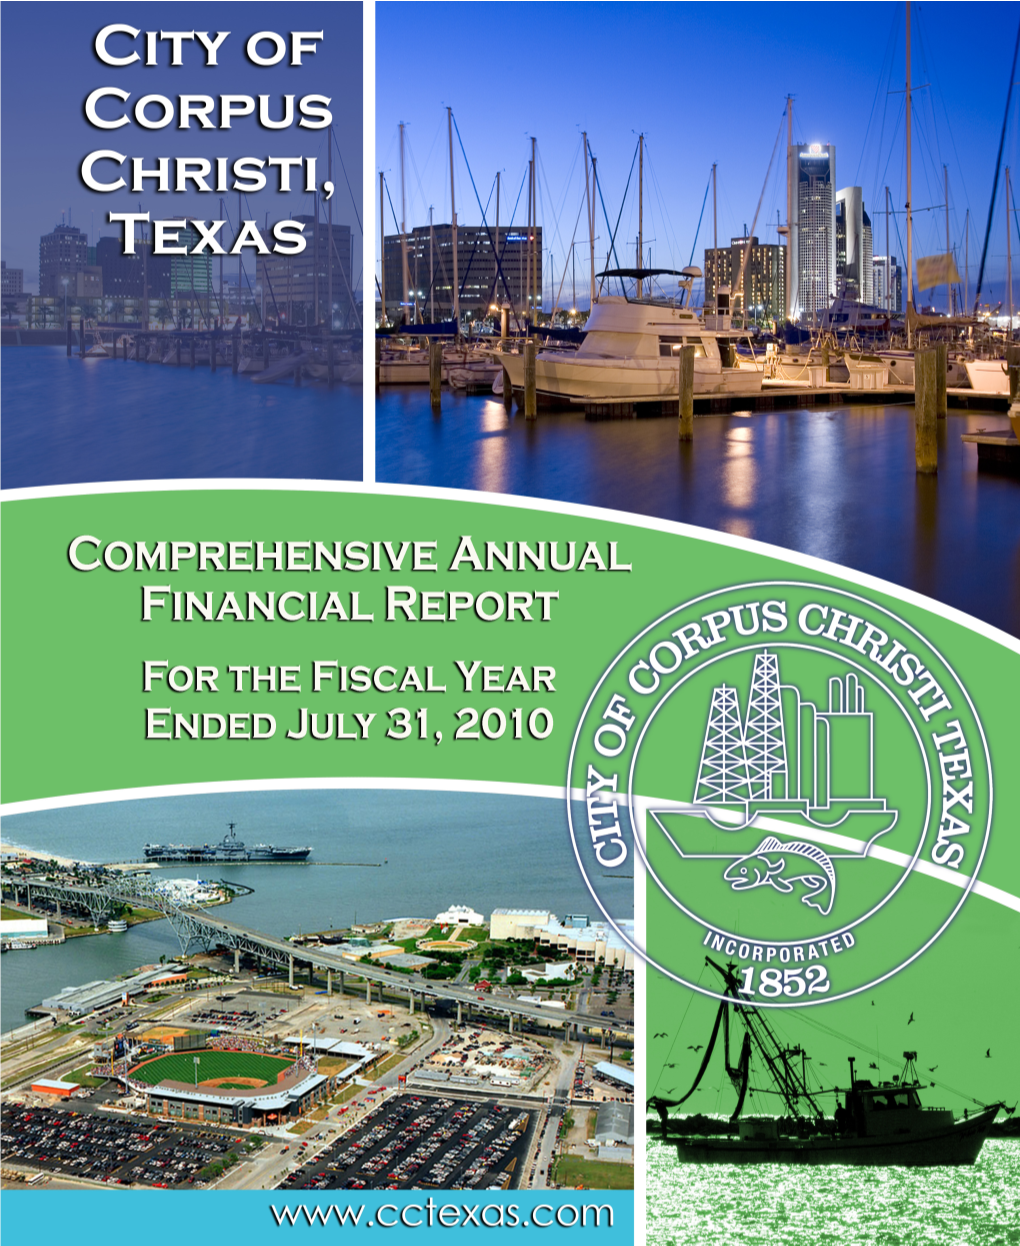 Comprehensive Annual Financial Report for Fiscal Year Ended July 31, 2010